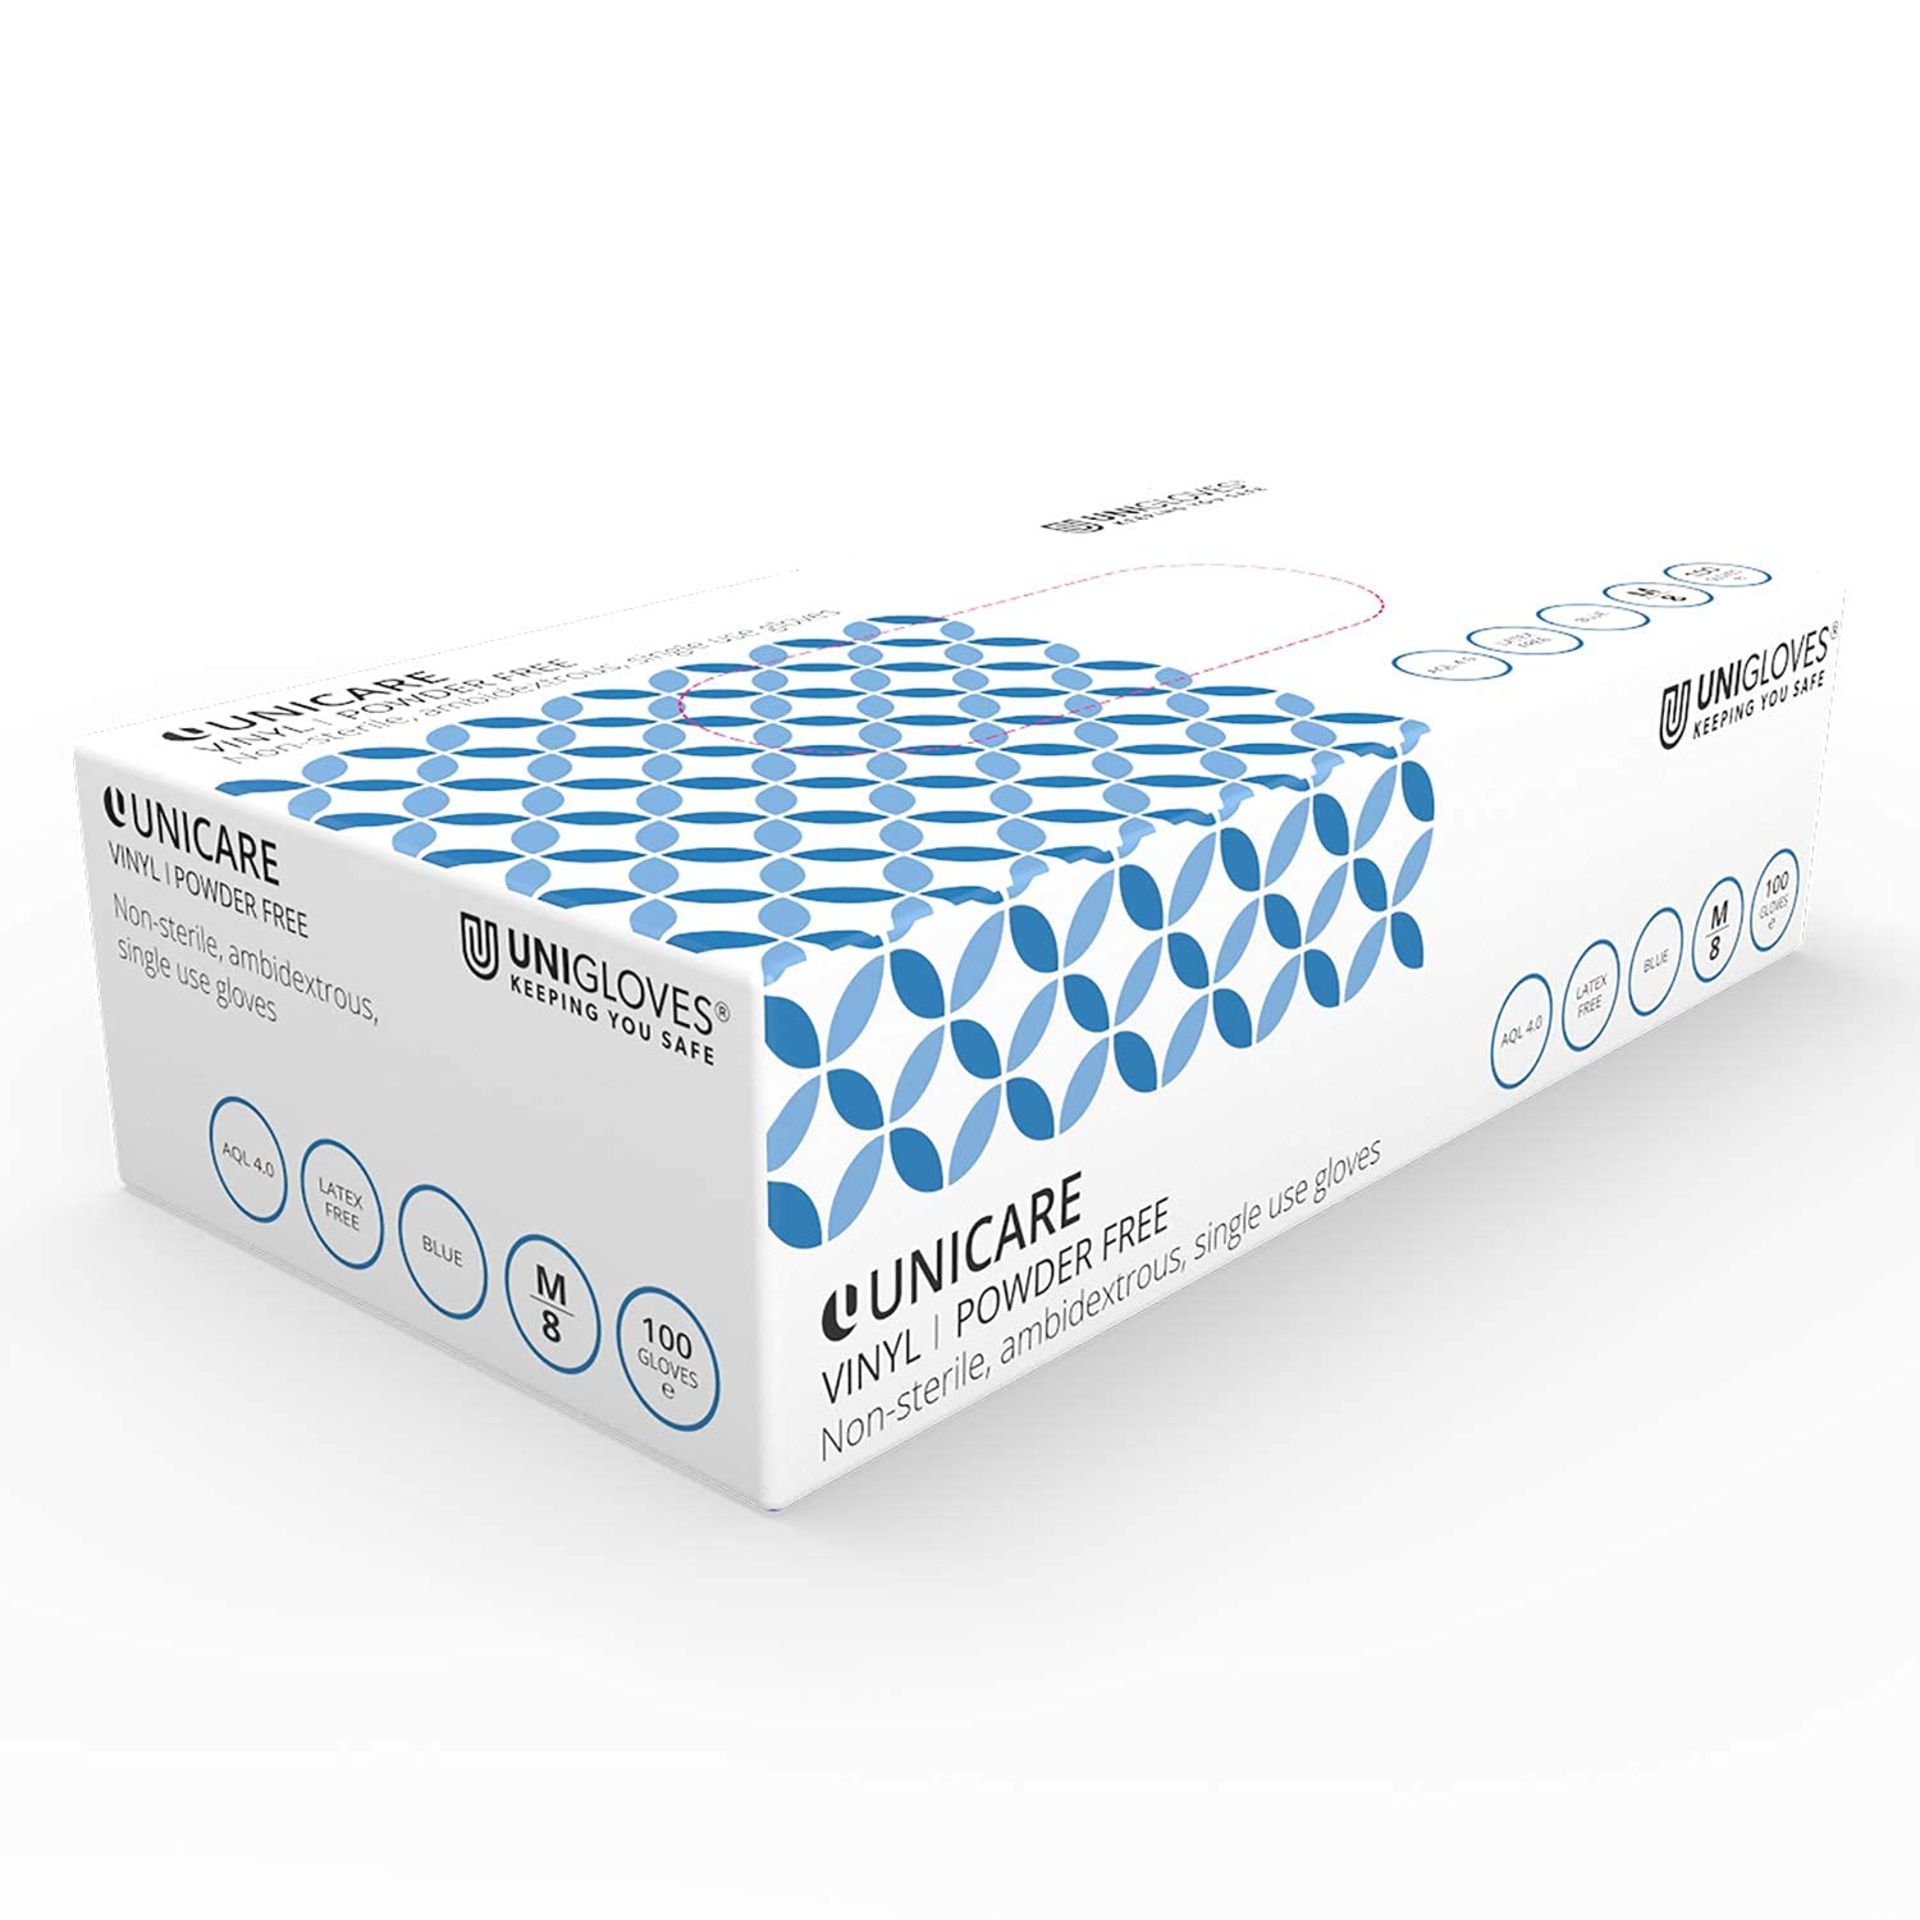 40 X BRAND NEW PACKS OF 100 UNICARE UNIGLOVES BLUE VINYL POWDERED NO STERILE AMBIDEXTROUS DISPOSABLE